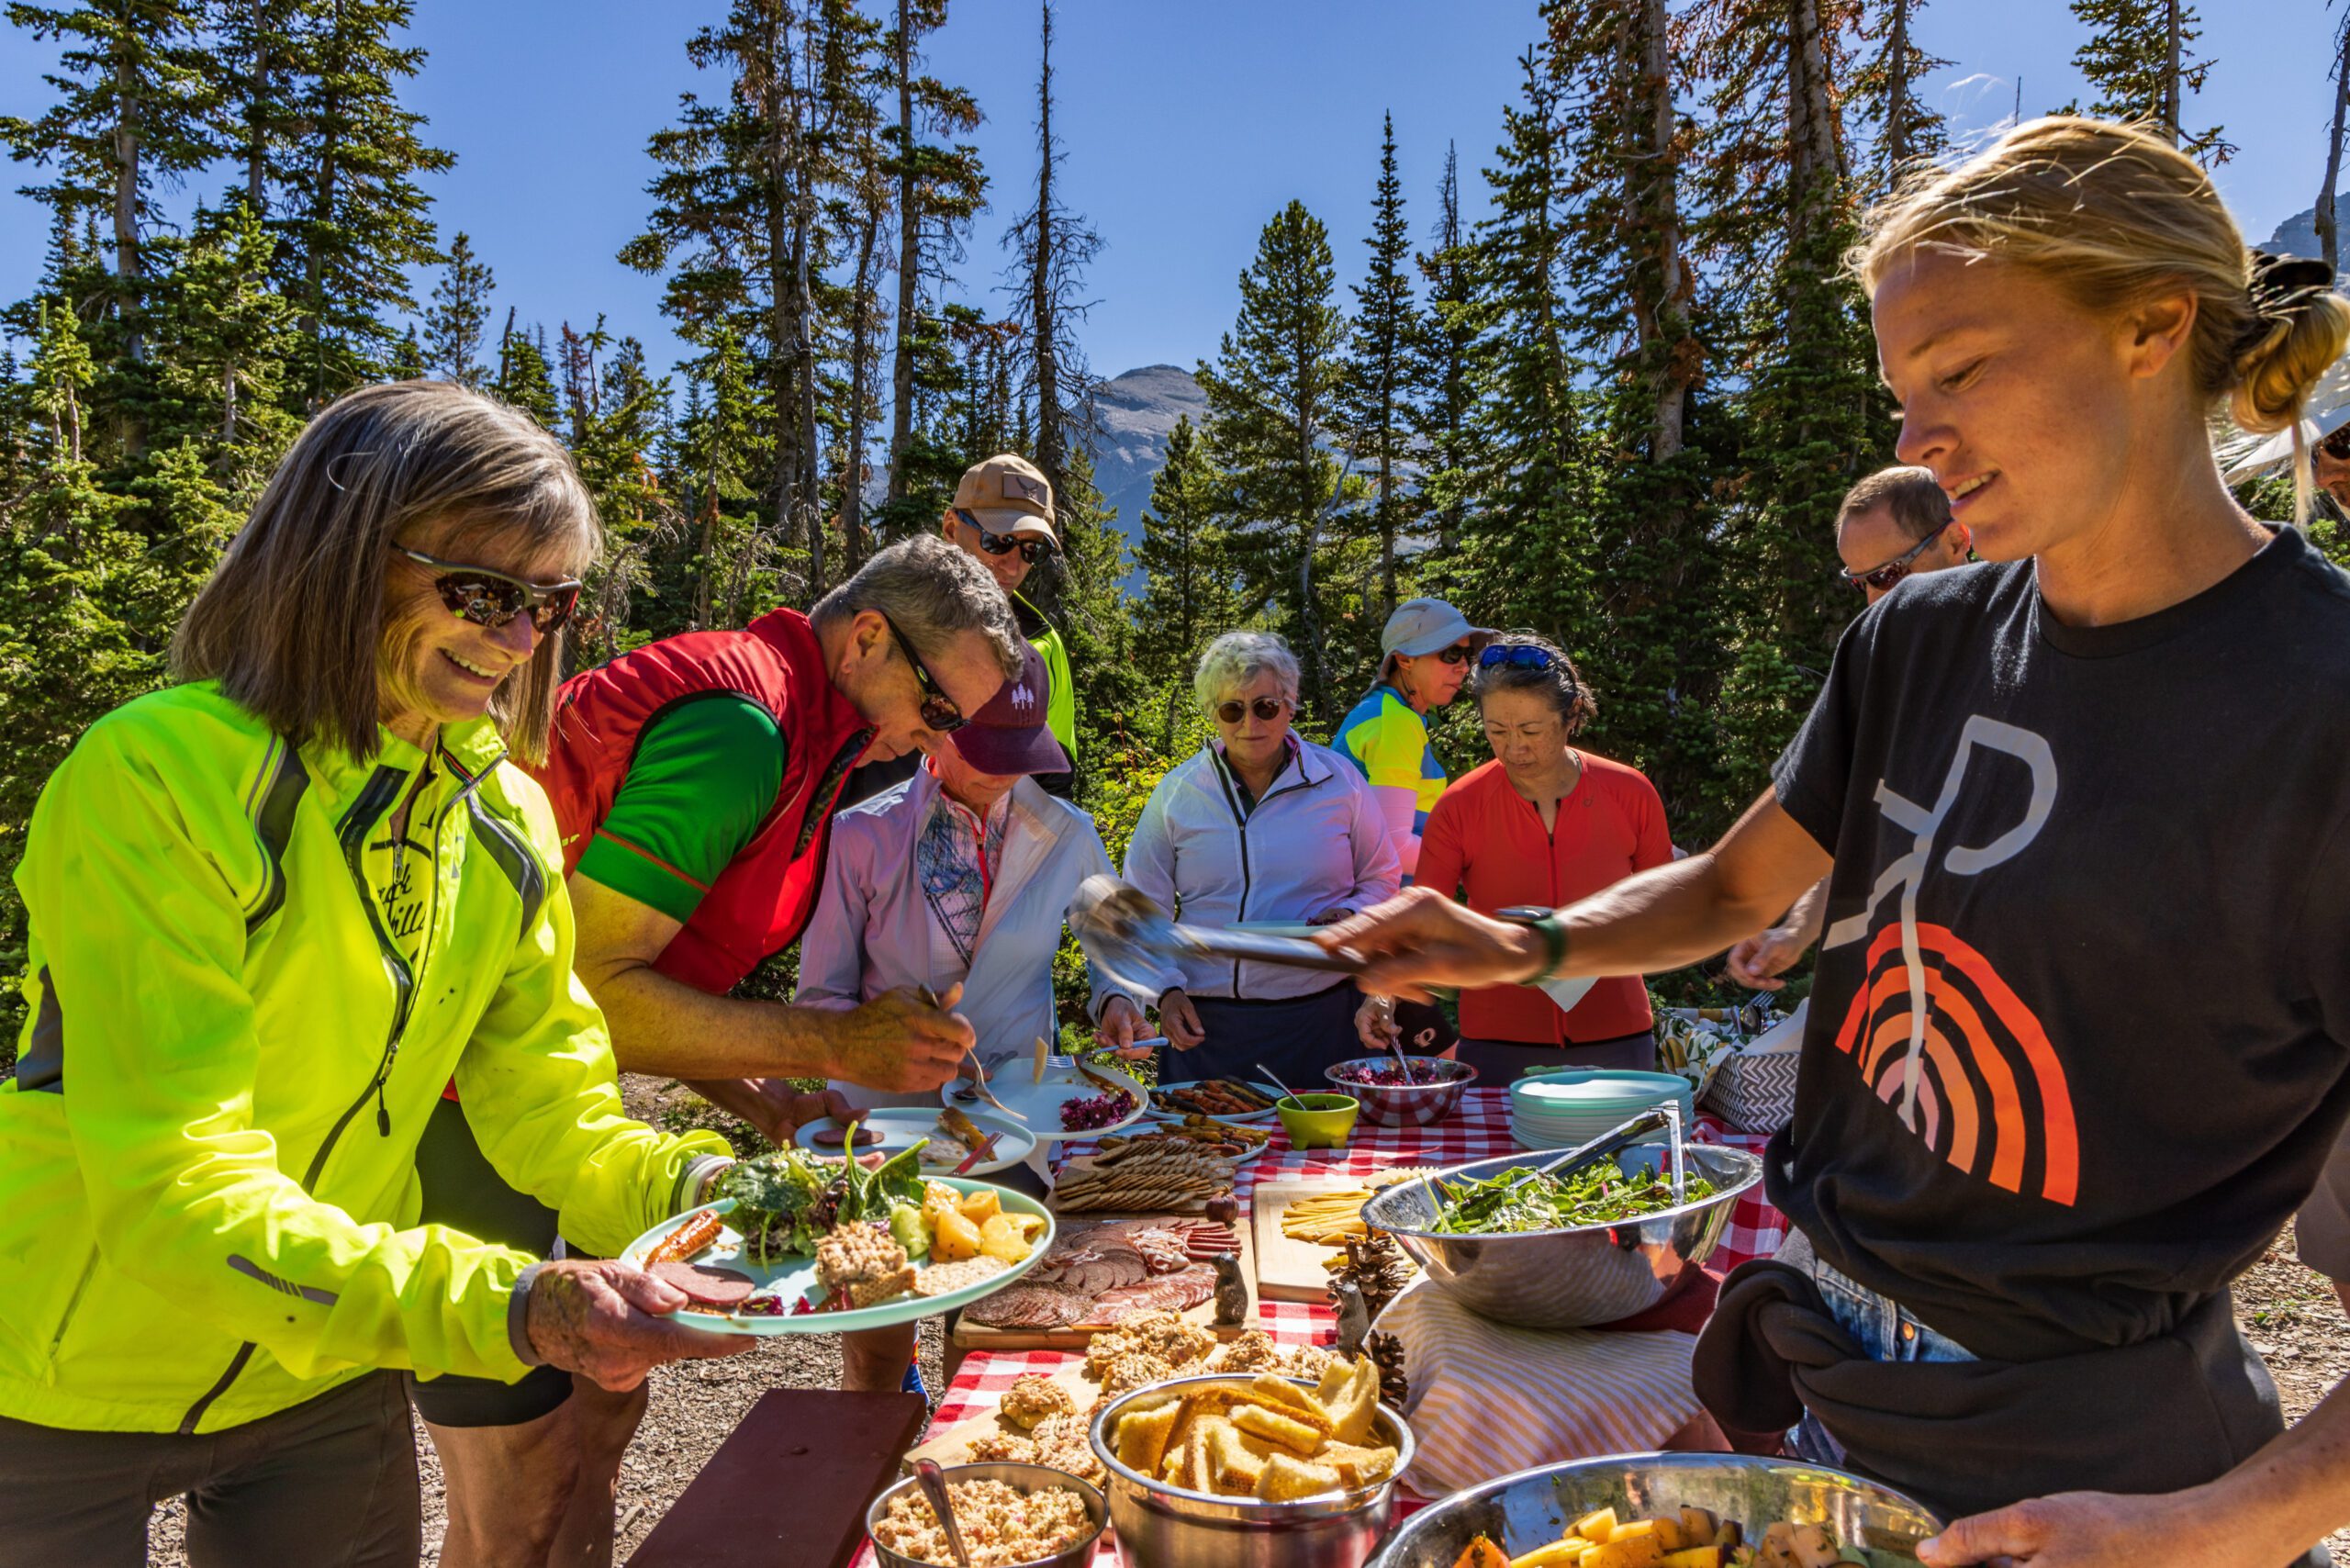 A picnic lunch in Glacier National Park